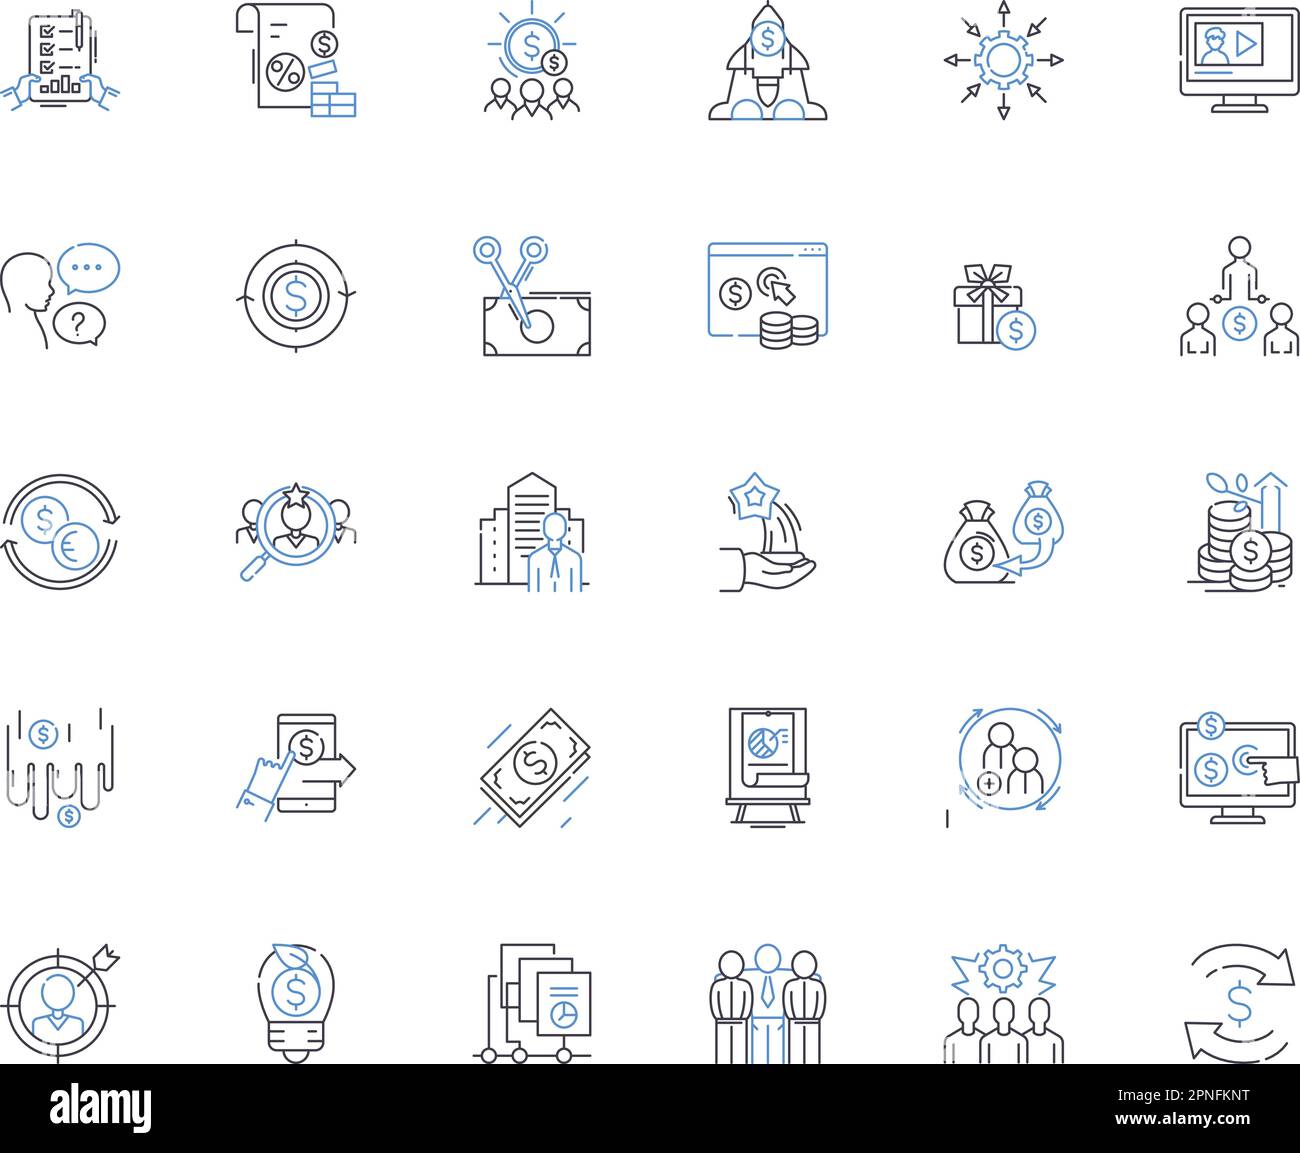 Marketing control line icons collection. Analysis, Metrics, Budget, Optimization, Segmentation, Communication, Planning vector and linear illustration Stock Vector